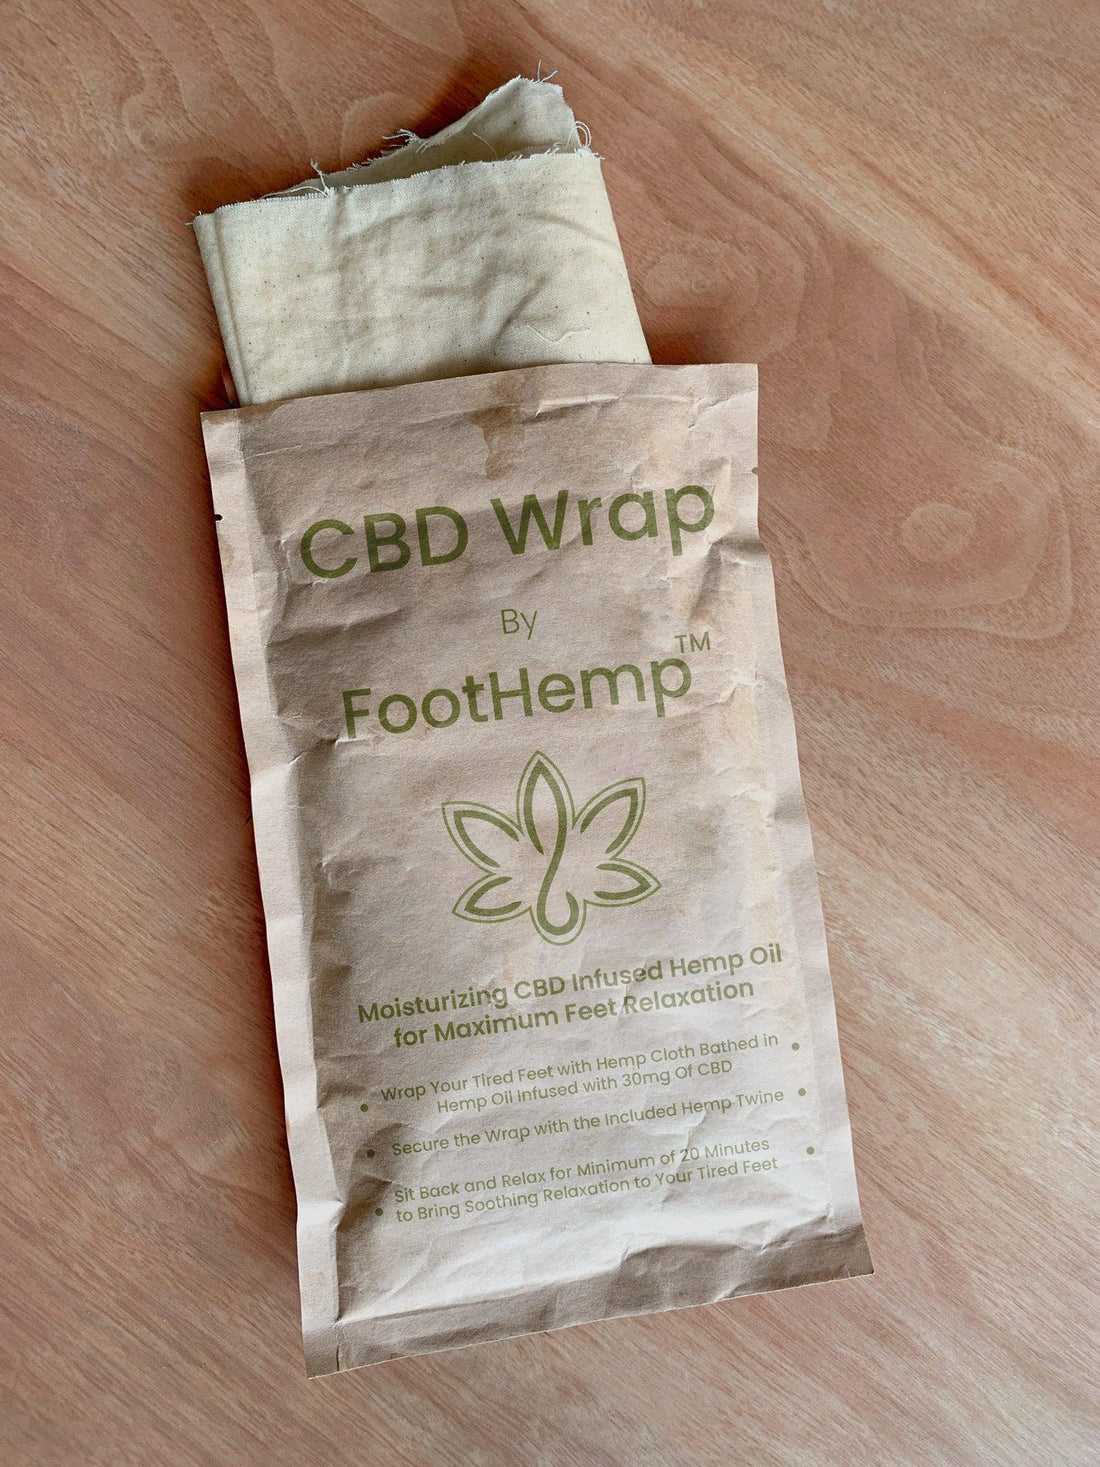 Are CBD Wraps Healthy Alternative or Just a Trend?